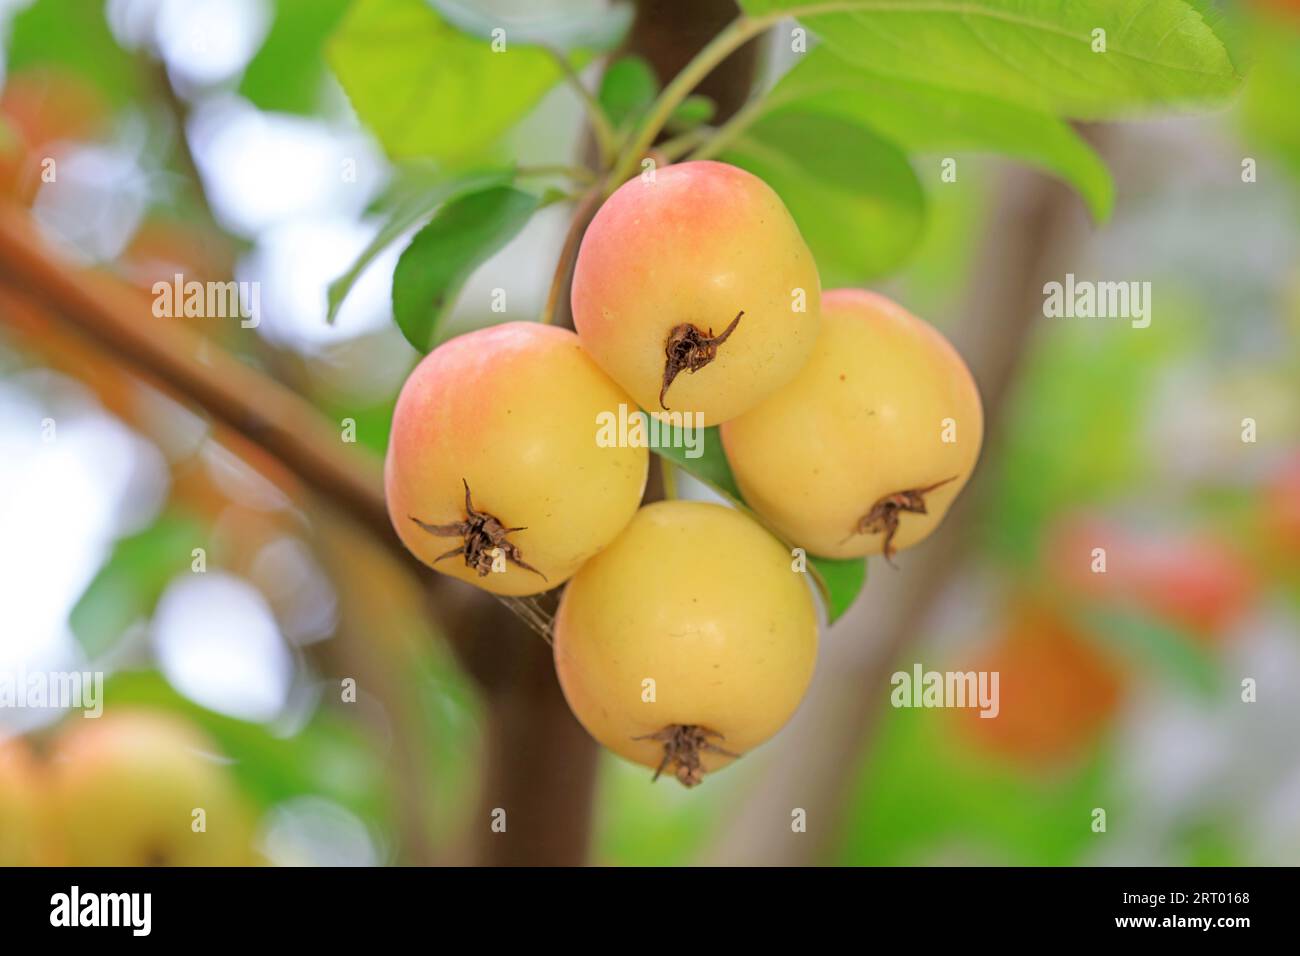 Ripe Begonia fruit on the branch, North China Stock Photo